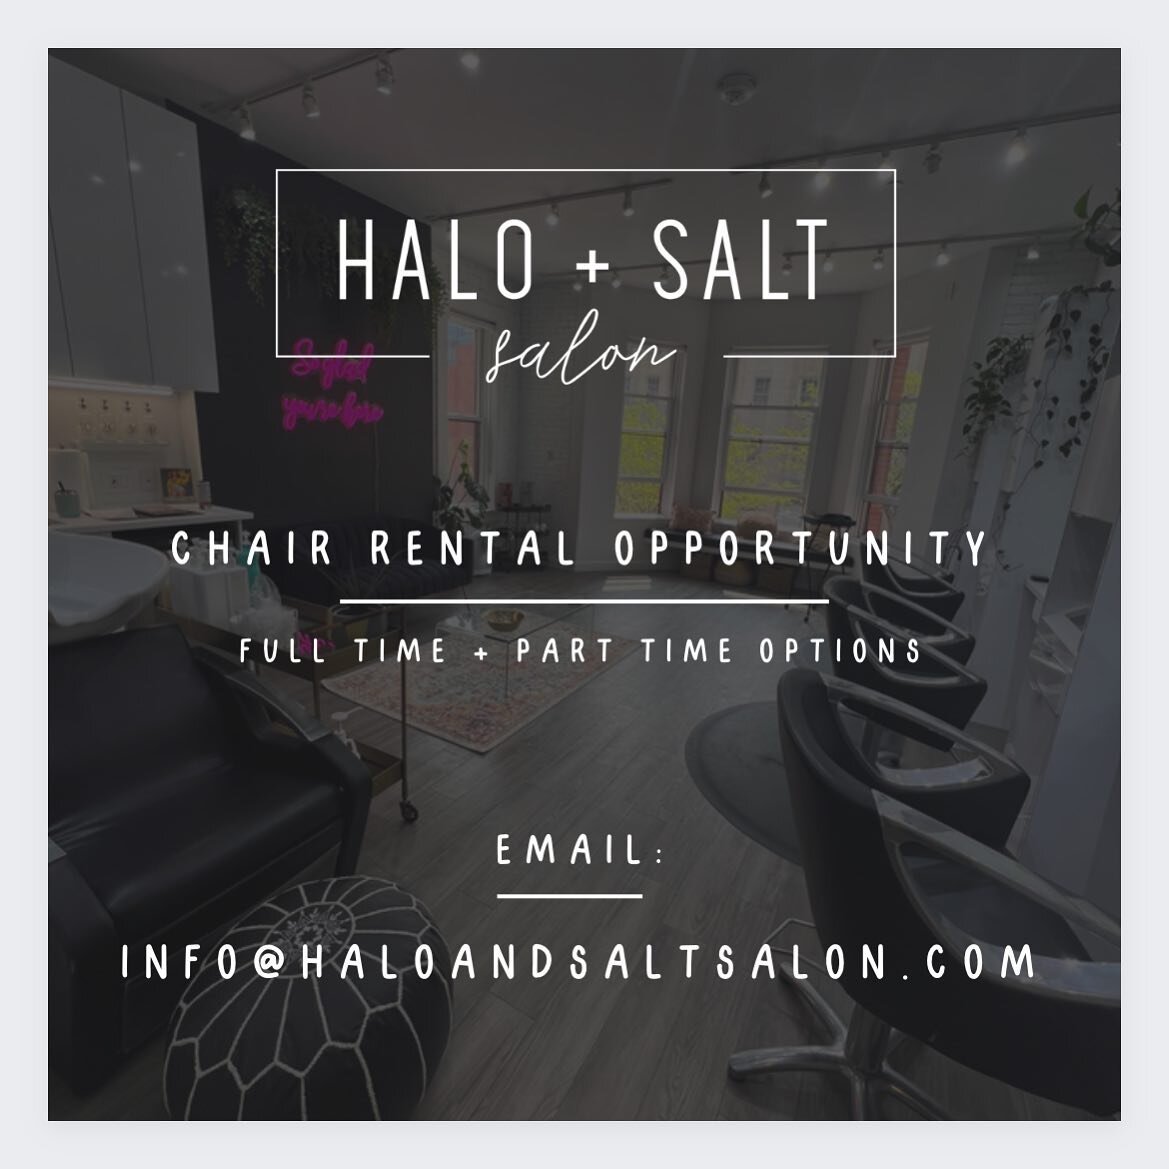 When we opened up @haloandsaltsalon 4 years ago, we had no idea what it would turn into. We are so thrilled that we now have an opportunity to share our favorite space with other stylists! 🫶🏼 We have both part time and full time opportunities. Emai